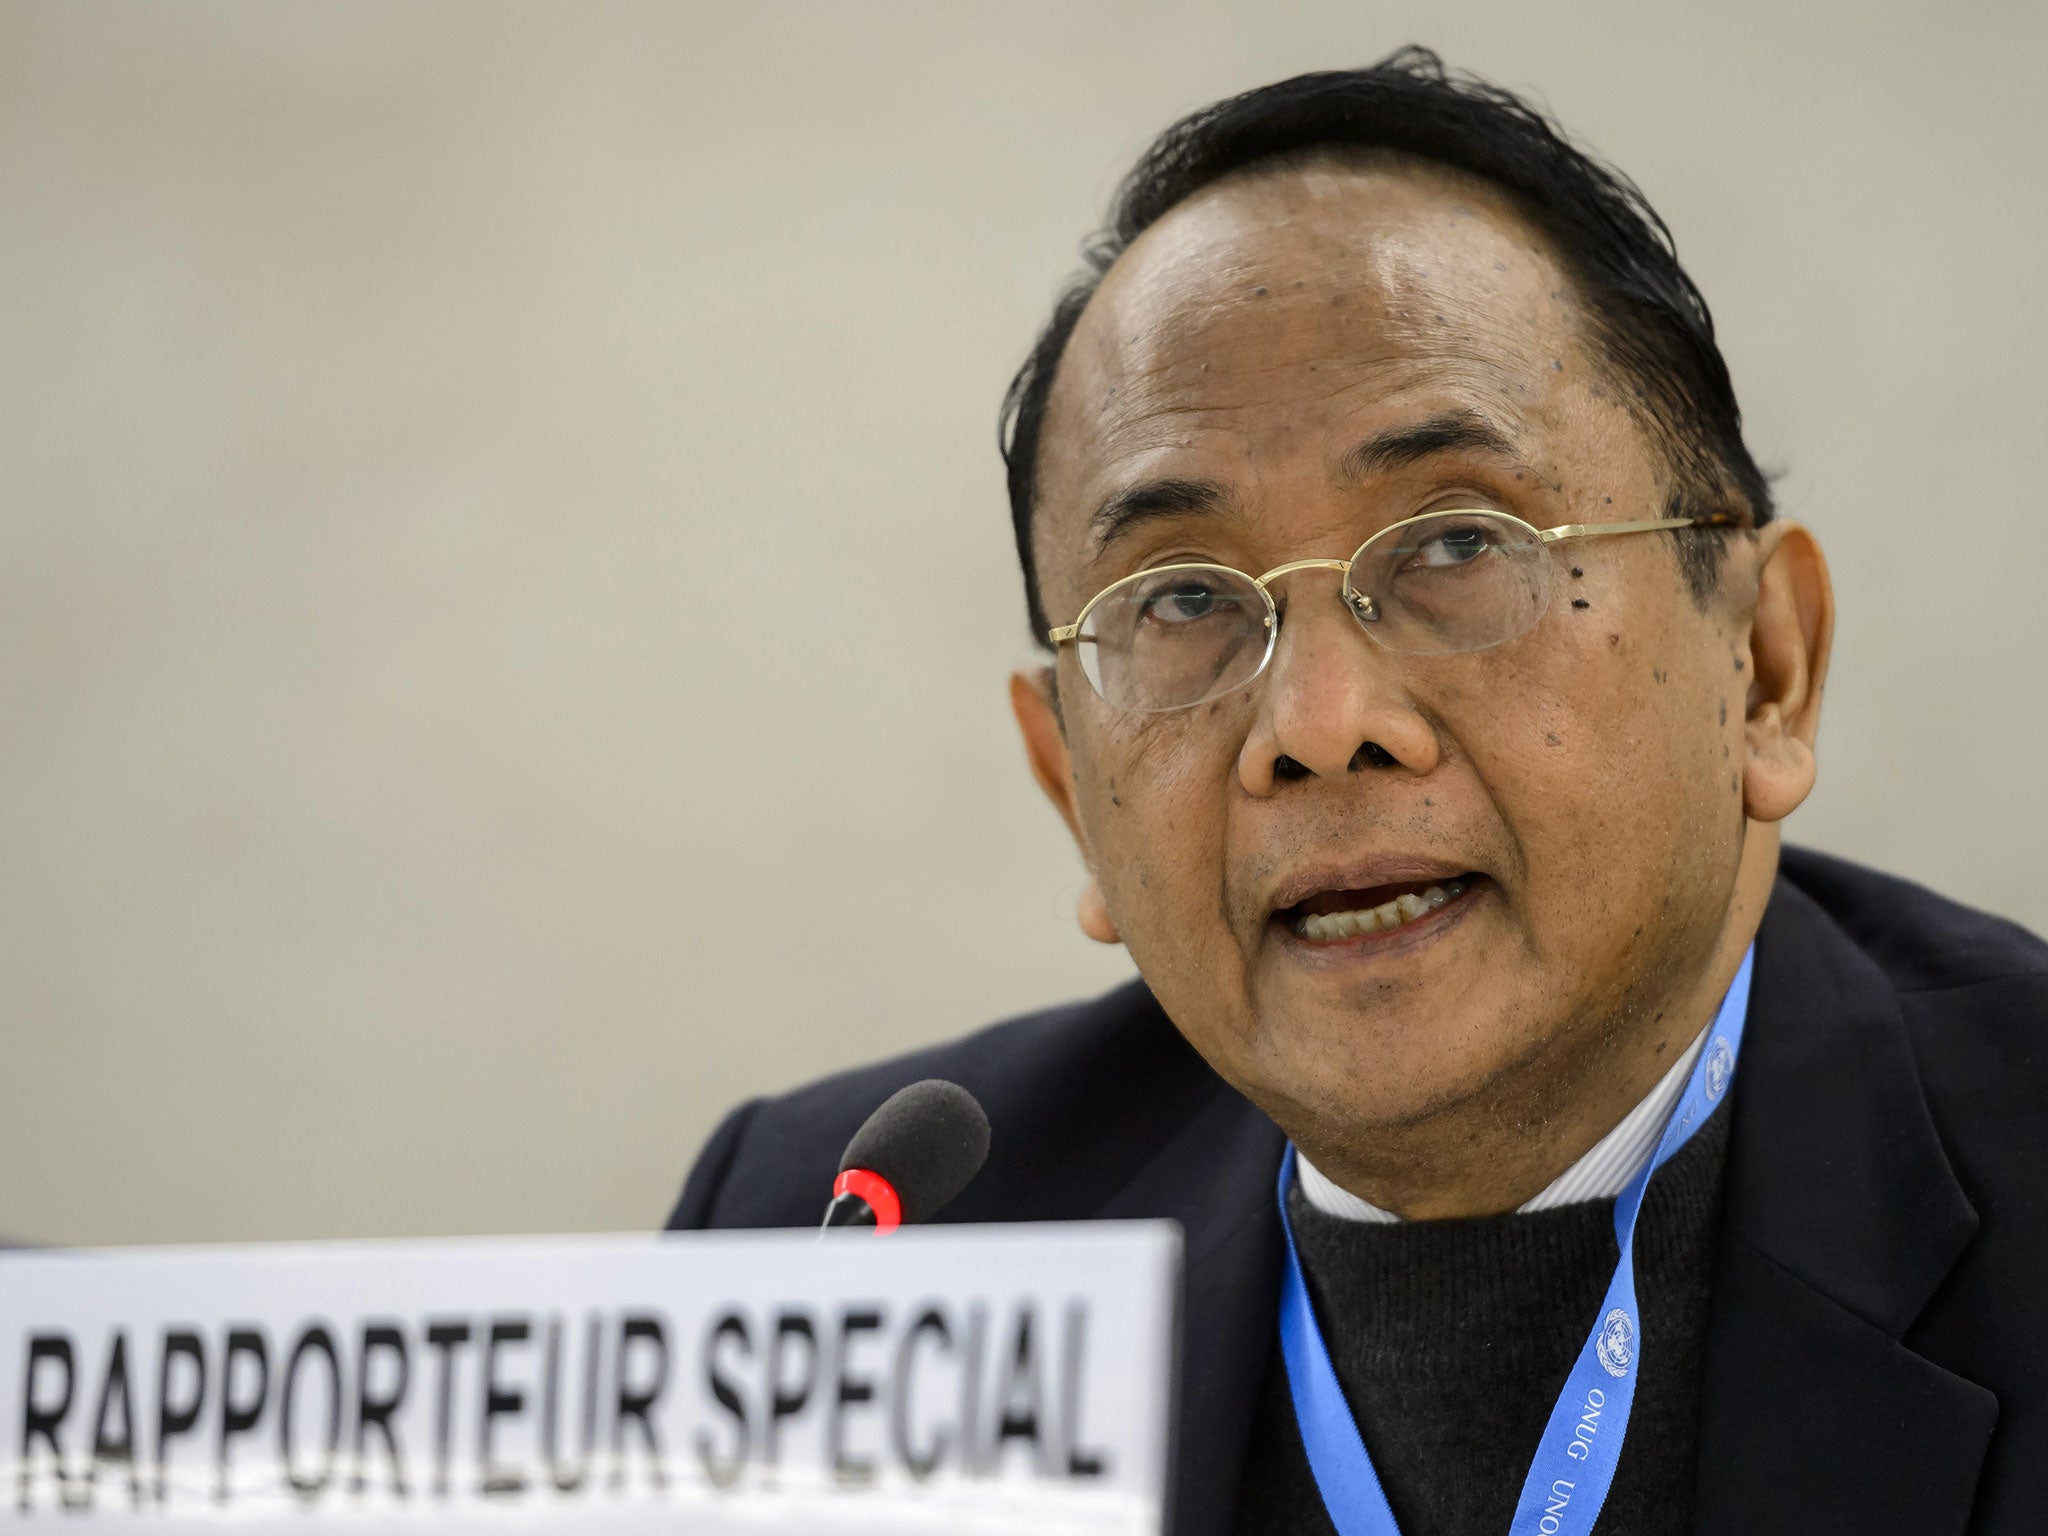 Makarim Wibisono, from Indonesia, was appointed UN special rapporteur for Palestinian territories in 2014